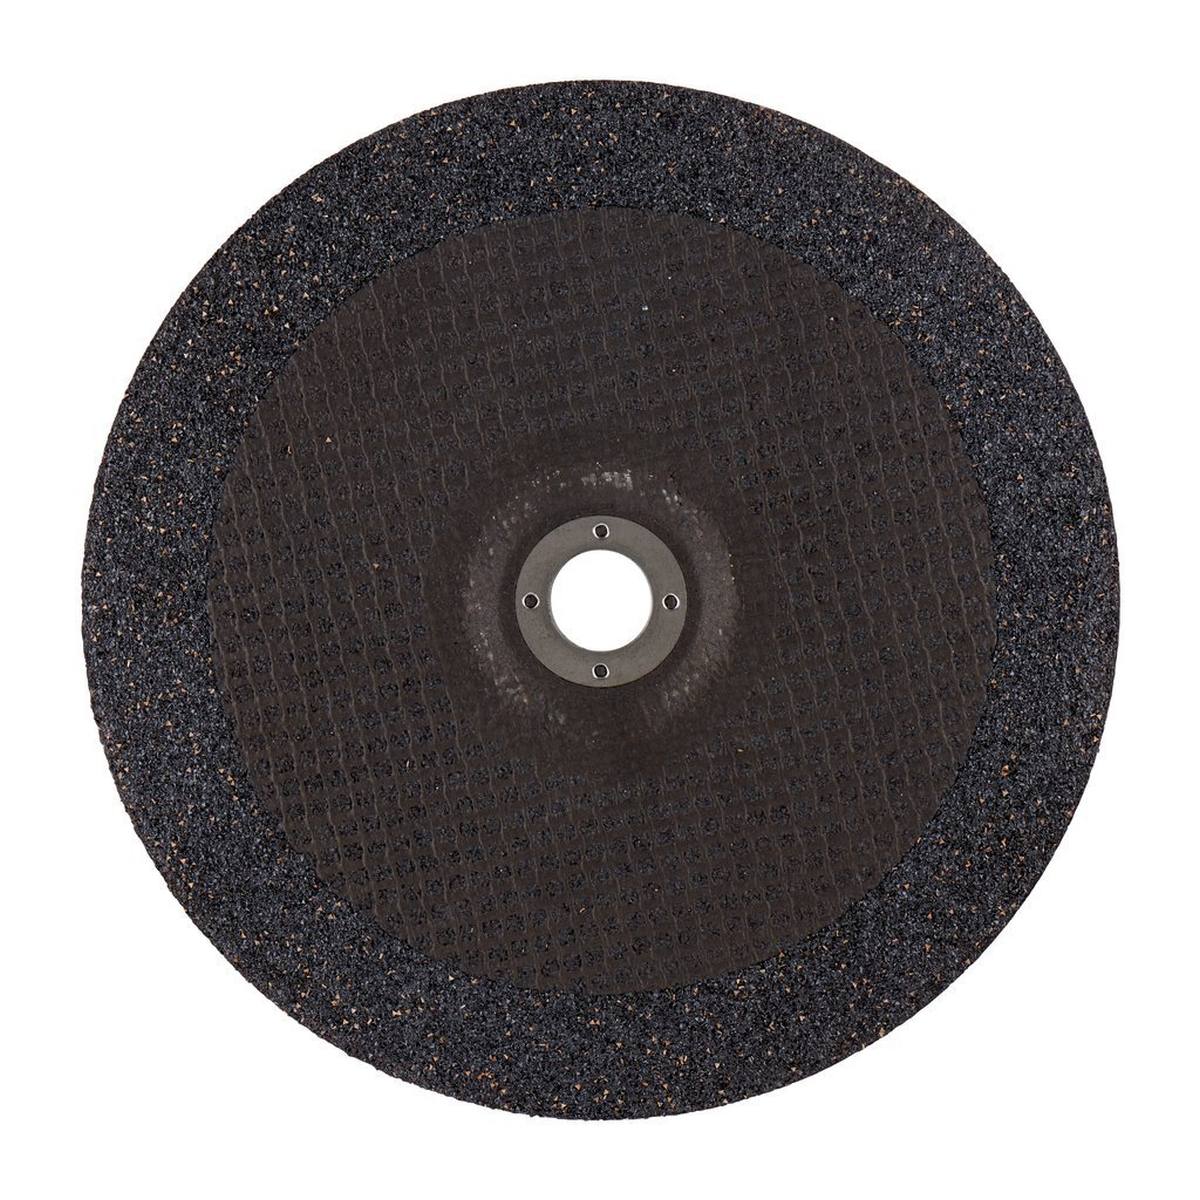 3M Silver grinding disc, 230 mm, 7.0 mm, 22.23 mm, type 27